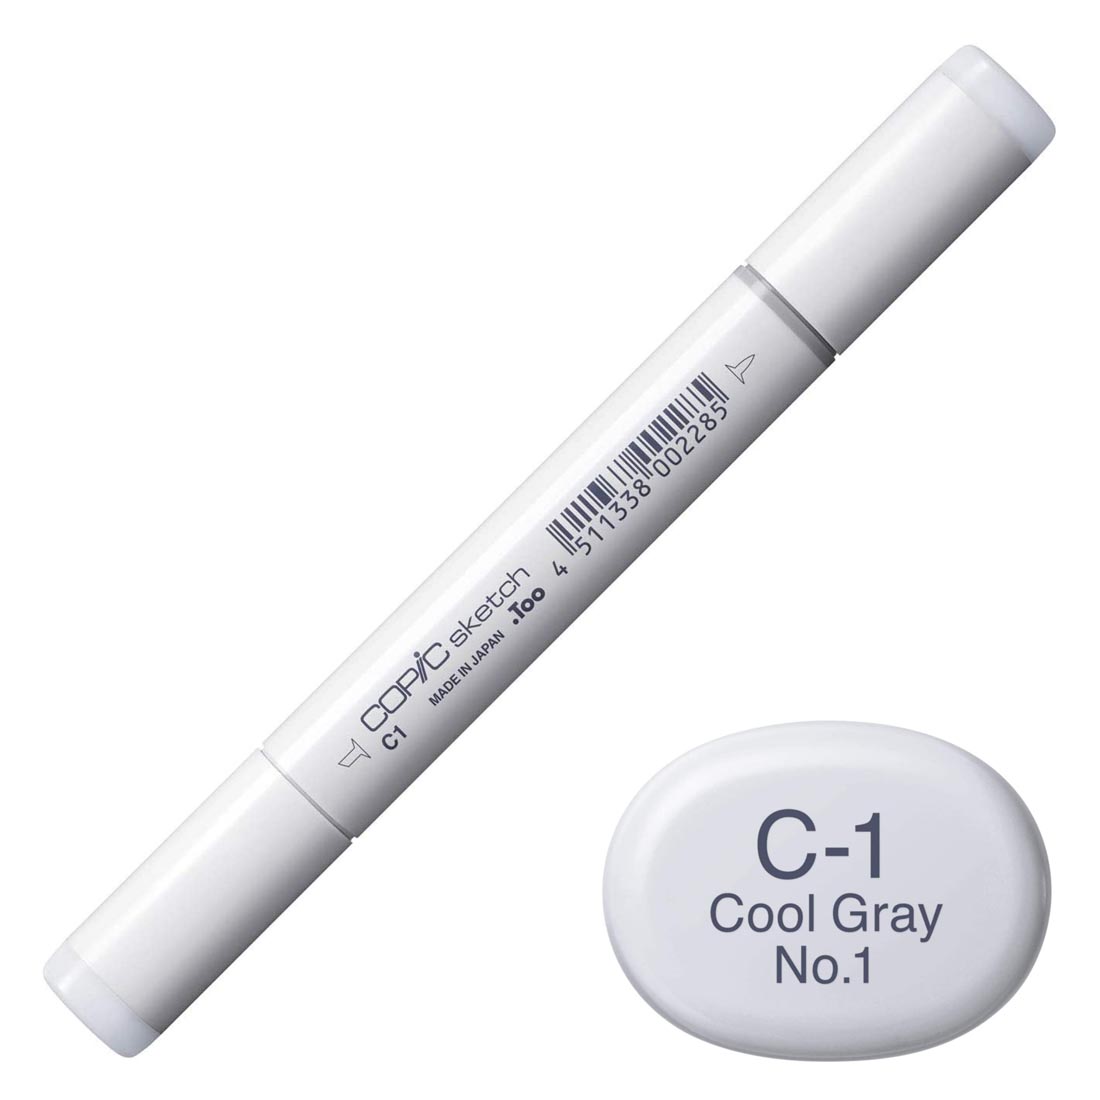 COPIC Sketch Marker with a color swatch and text of C-1 Cool Gray No.1